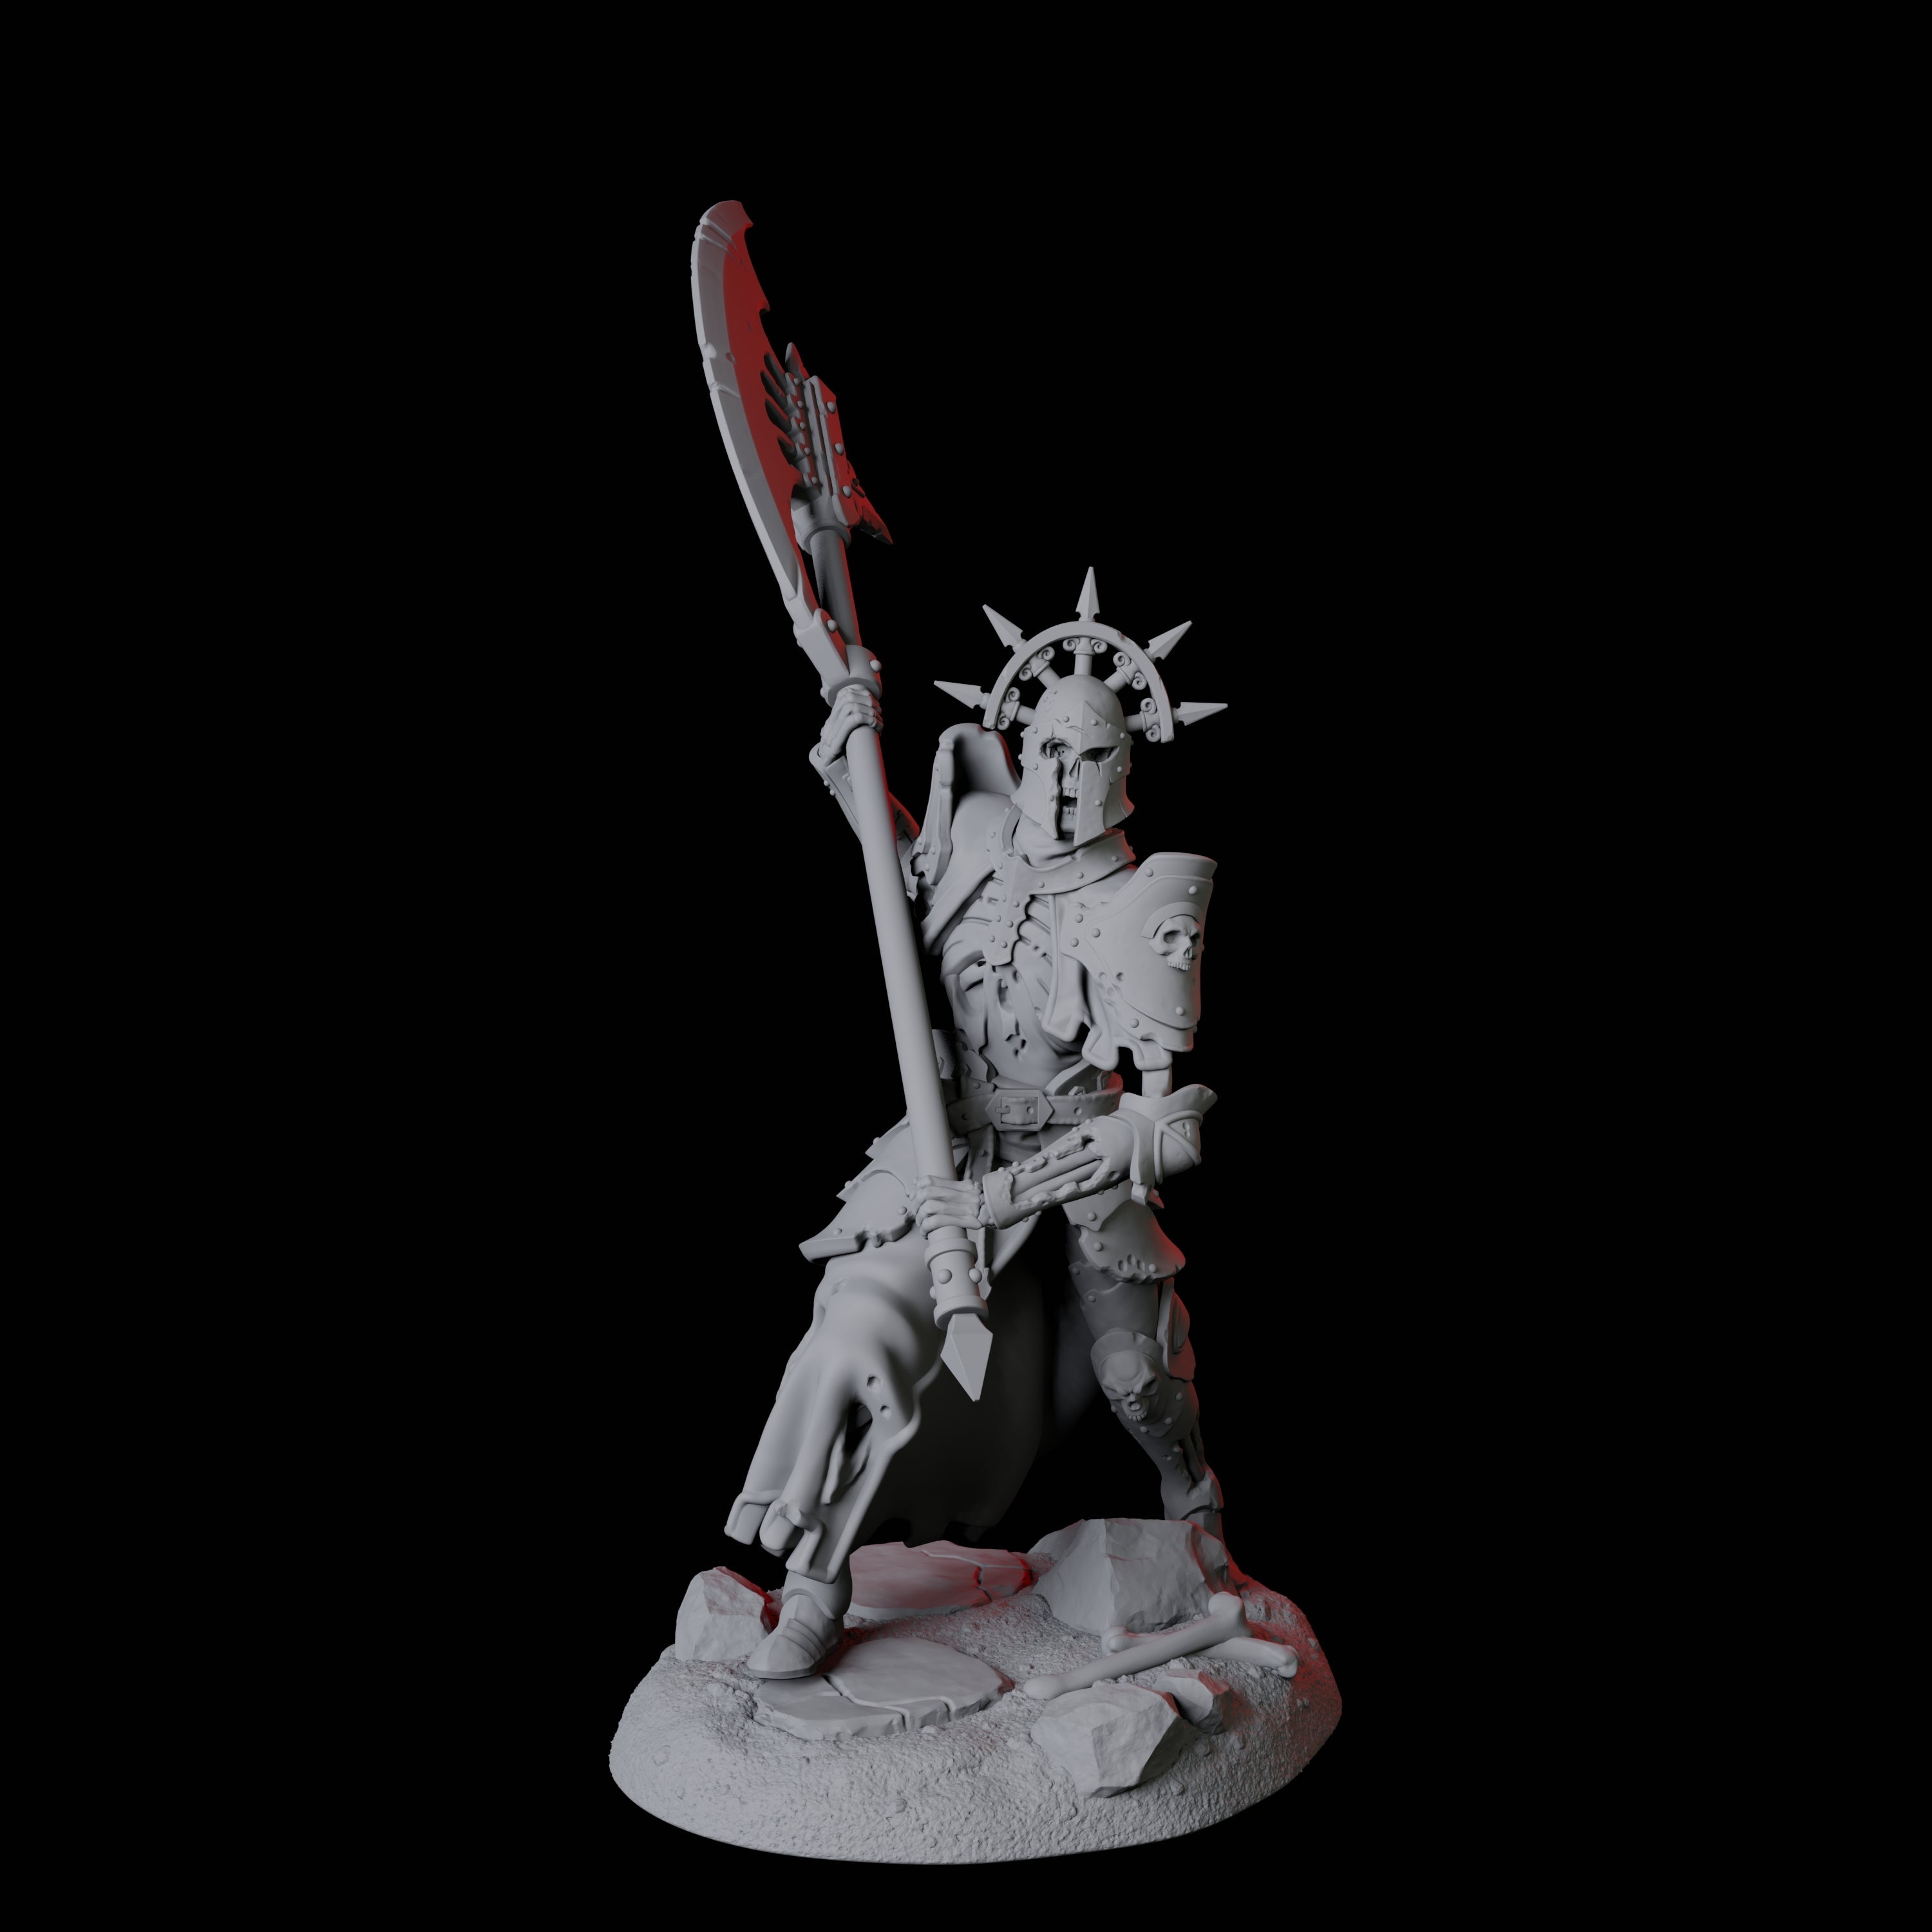 Roaming Undead Warrior A Miniature for Dungeons and Dragons, Pathfinder or other TTRPGs